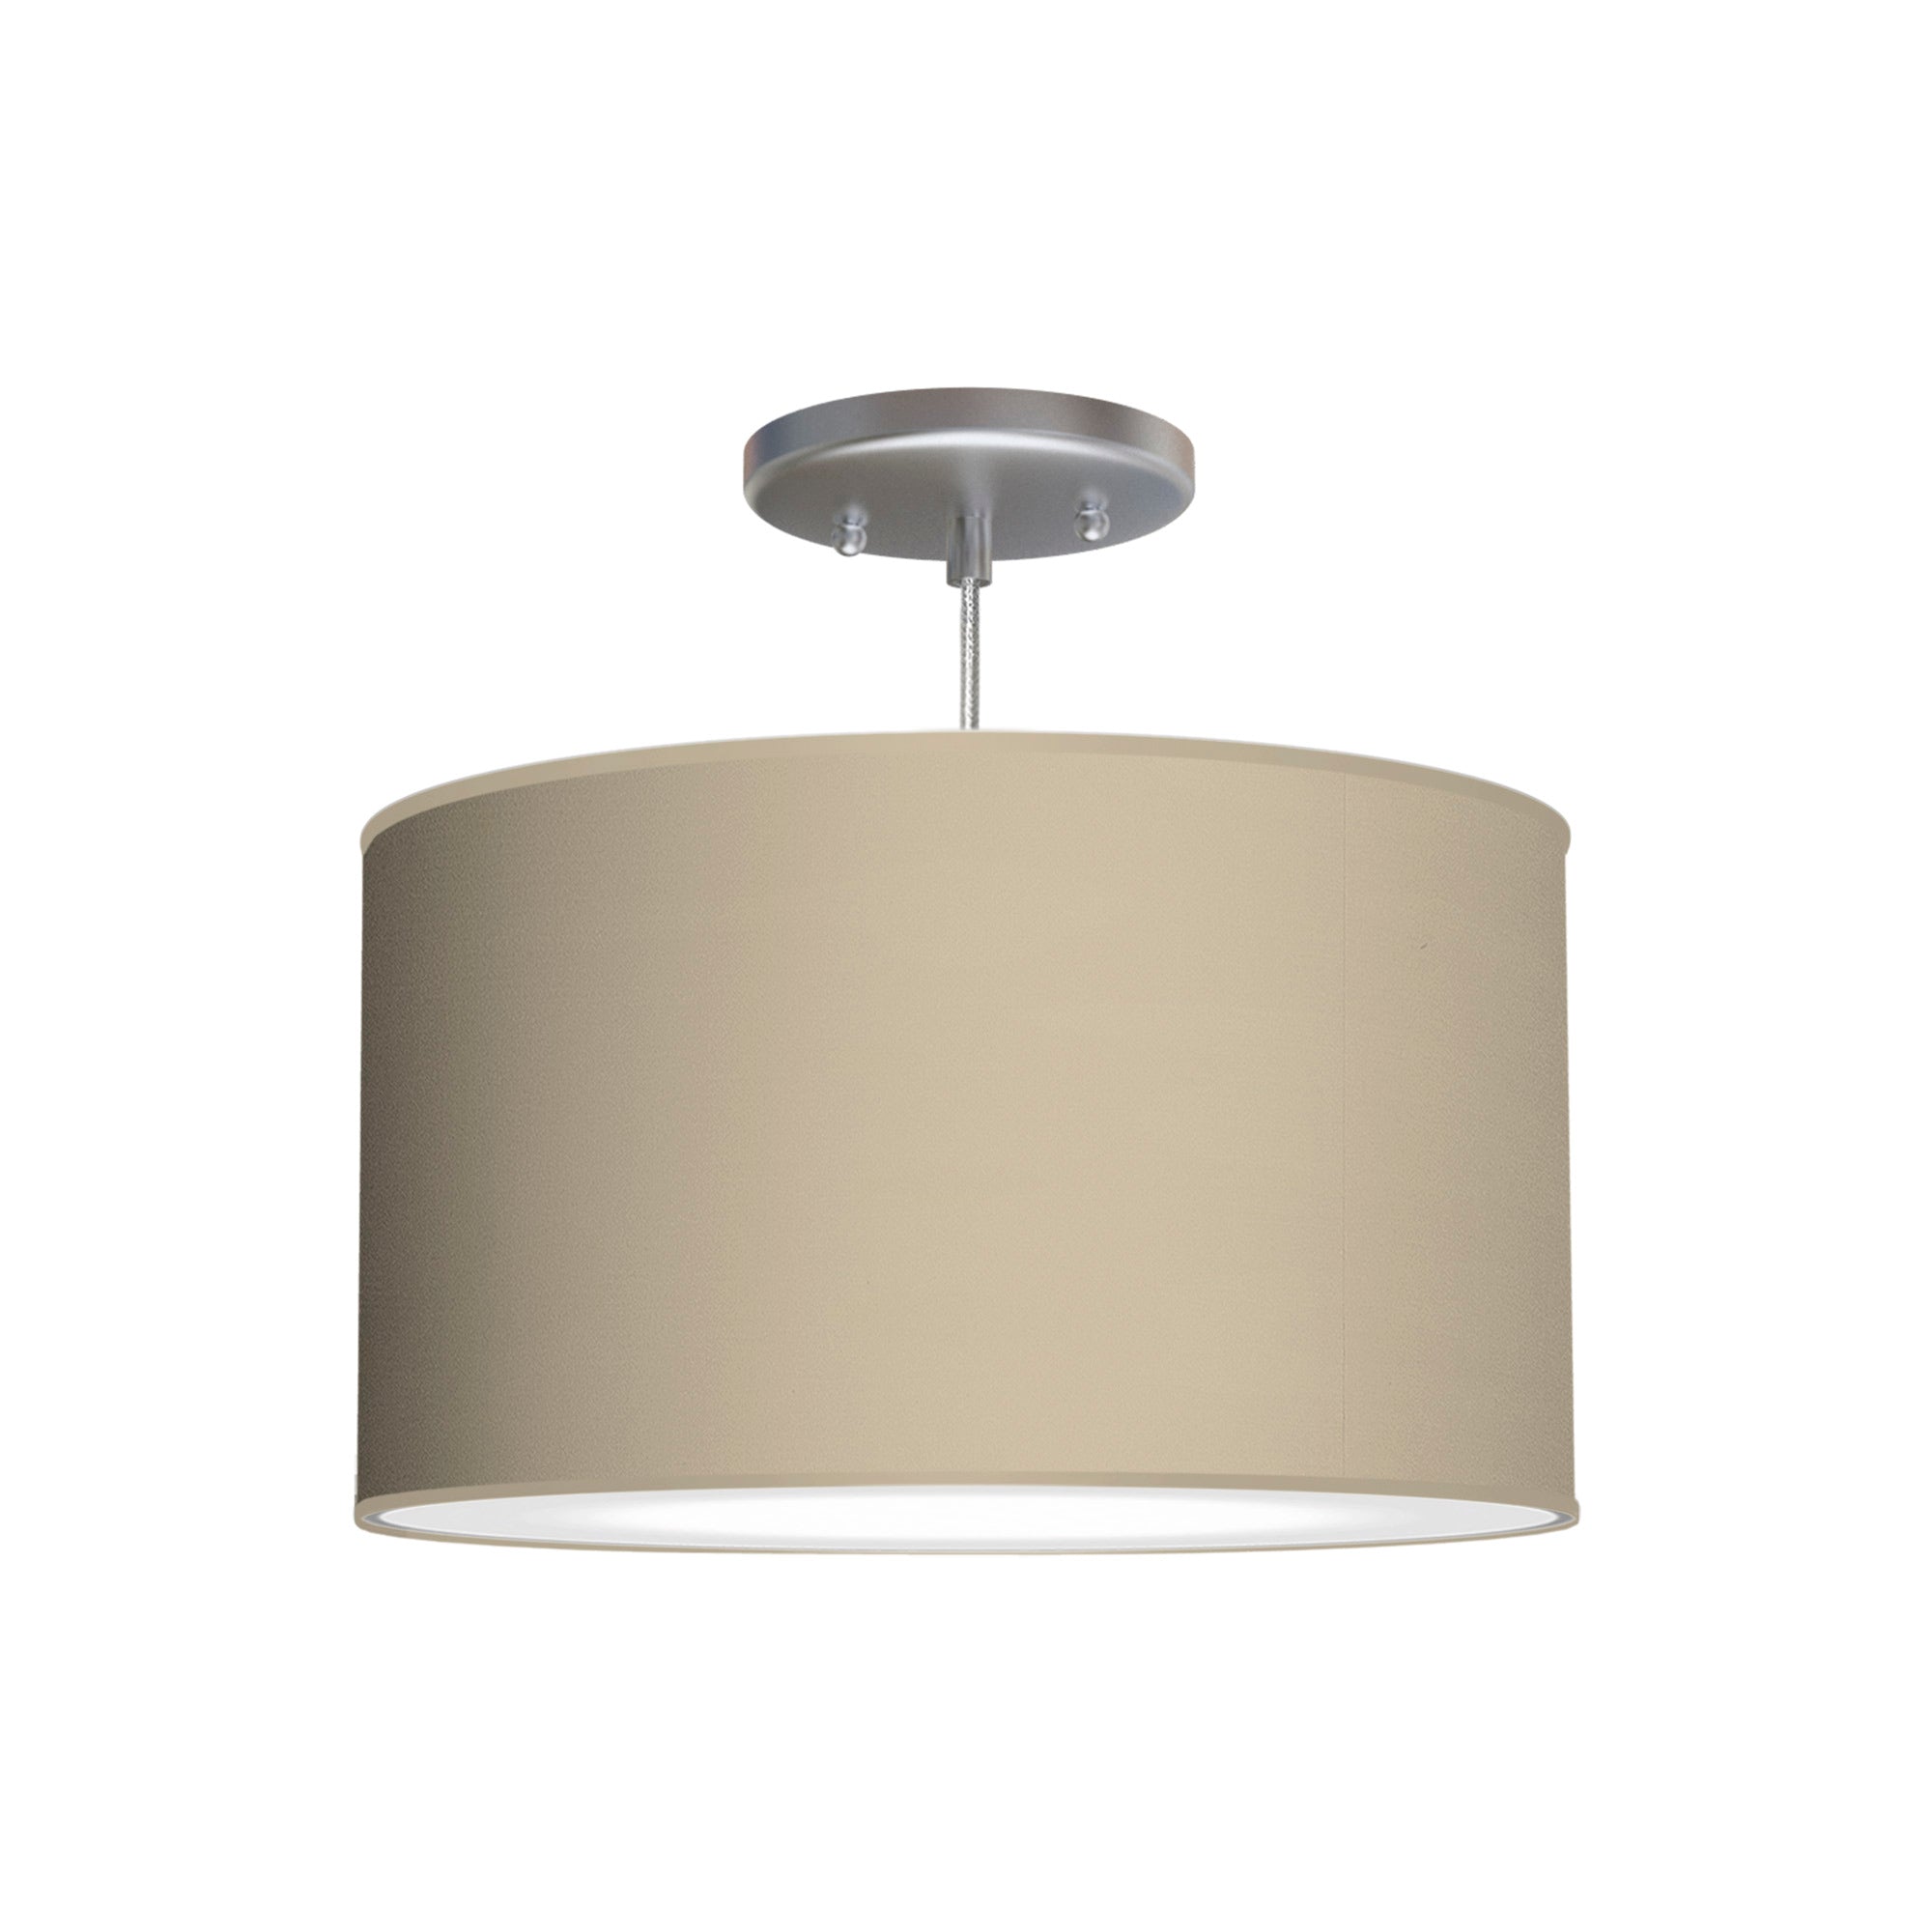 The Gab Hanging Lamp from Seascape Fixtures with a linen shade in tan color.